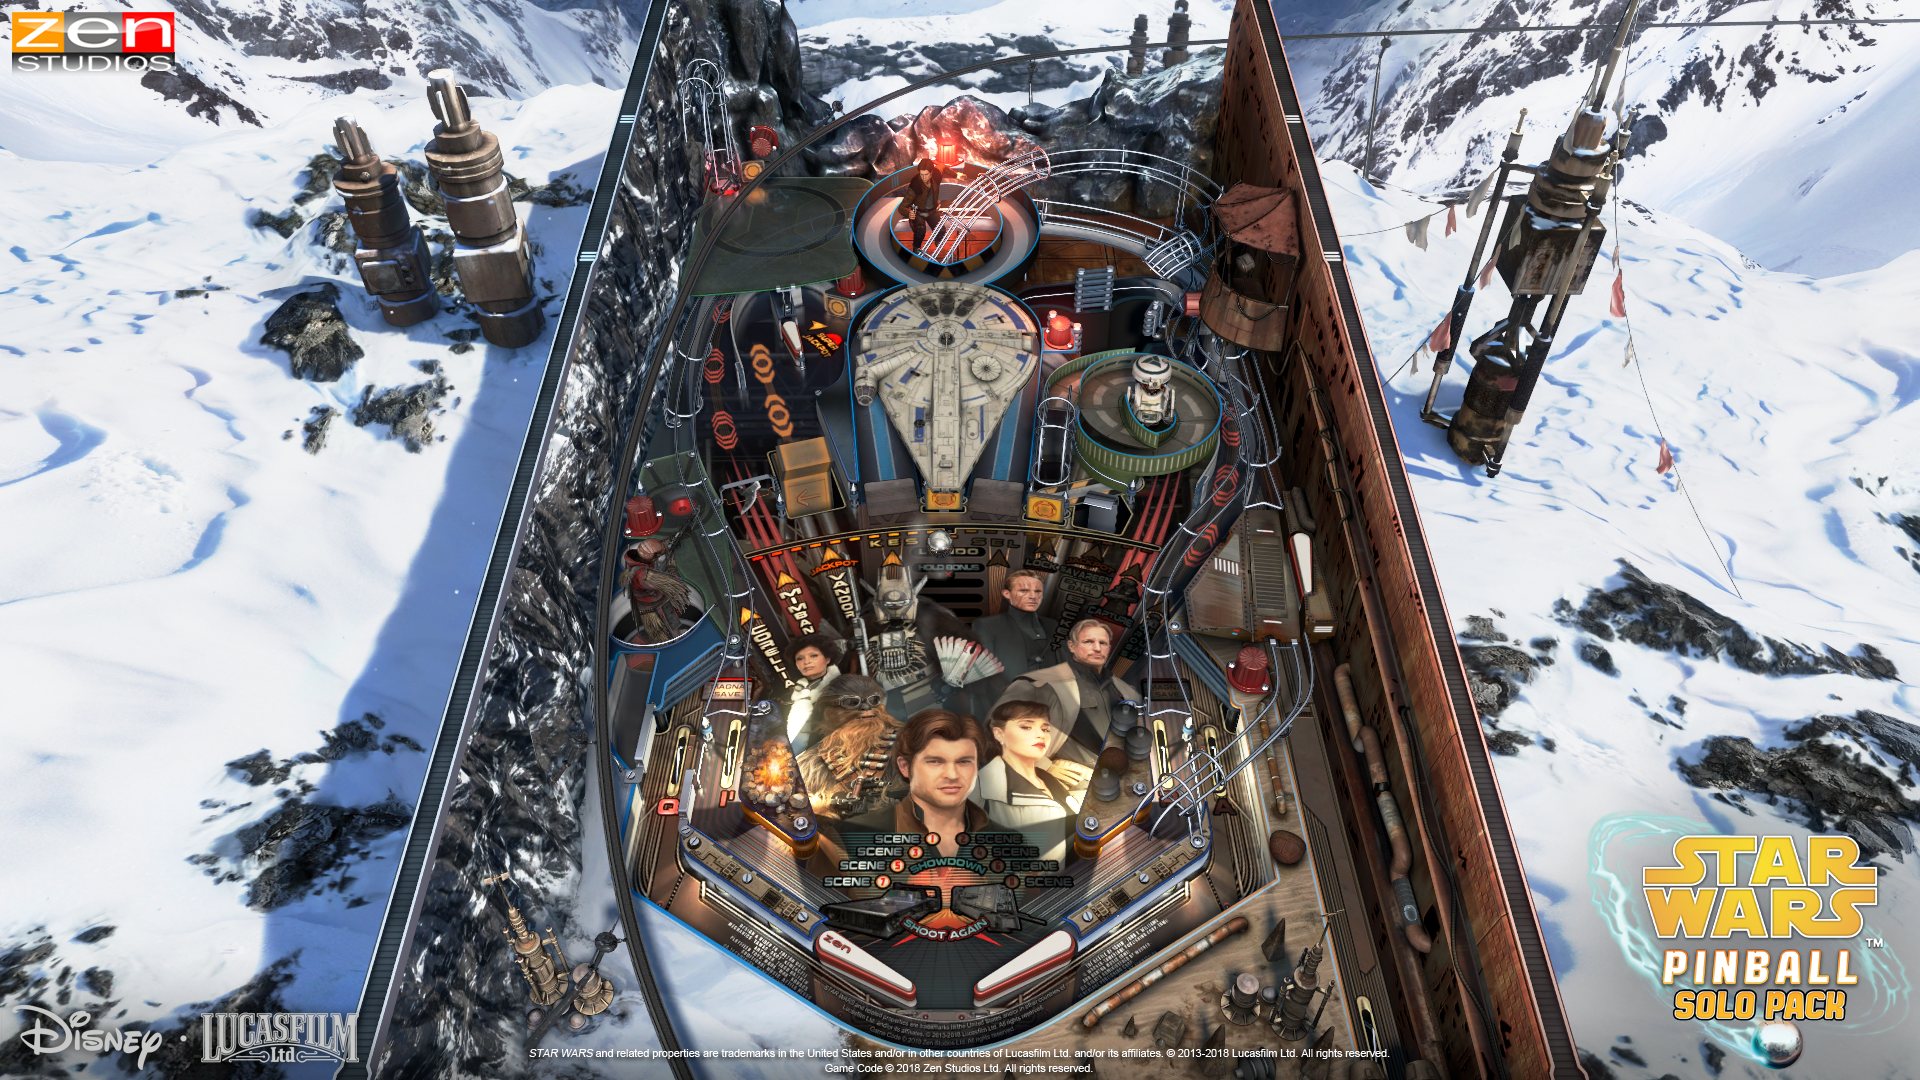 Star Wars Pinball: Solo Pack